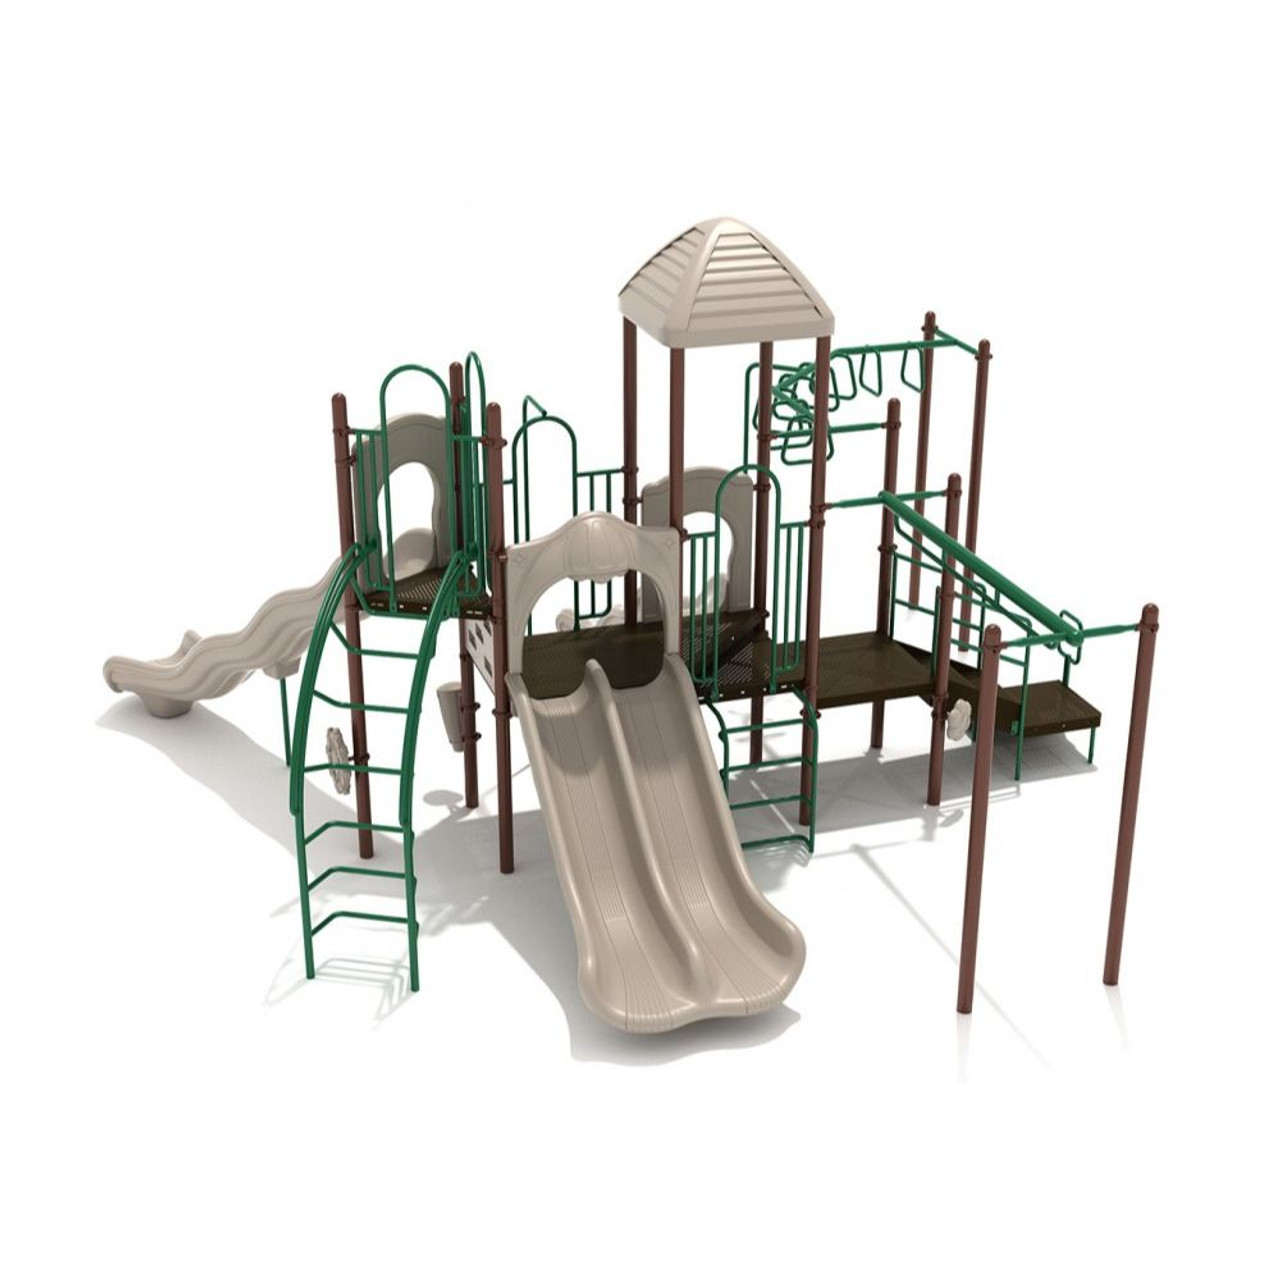 Imperial Springs Playset - neutral - arch ladder side